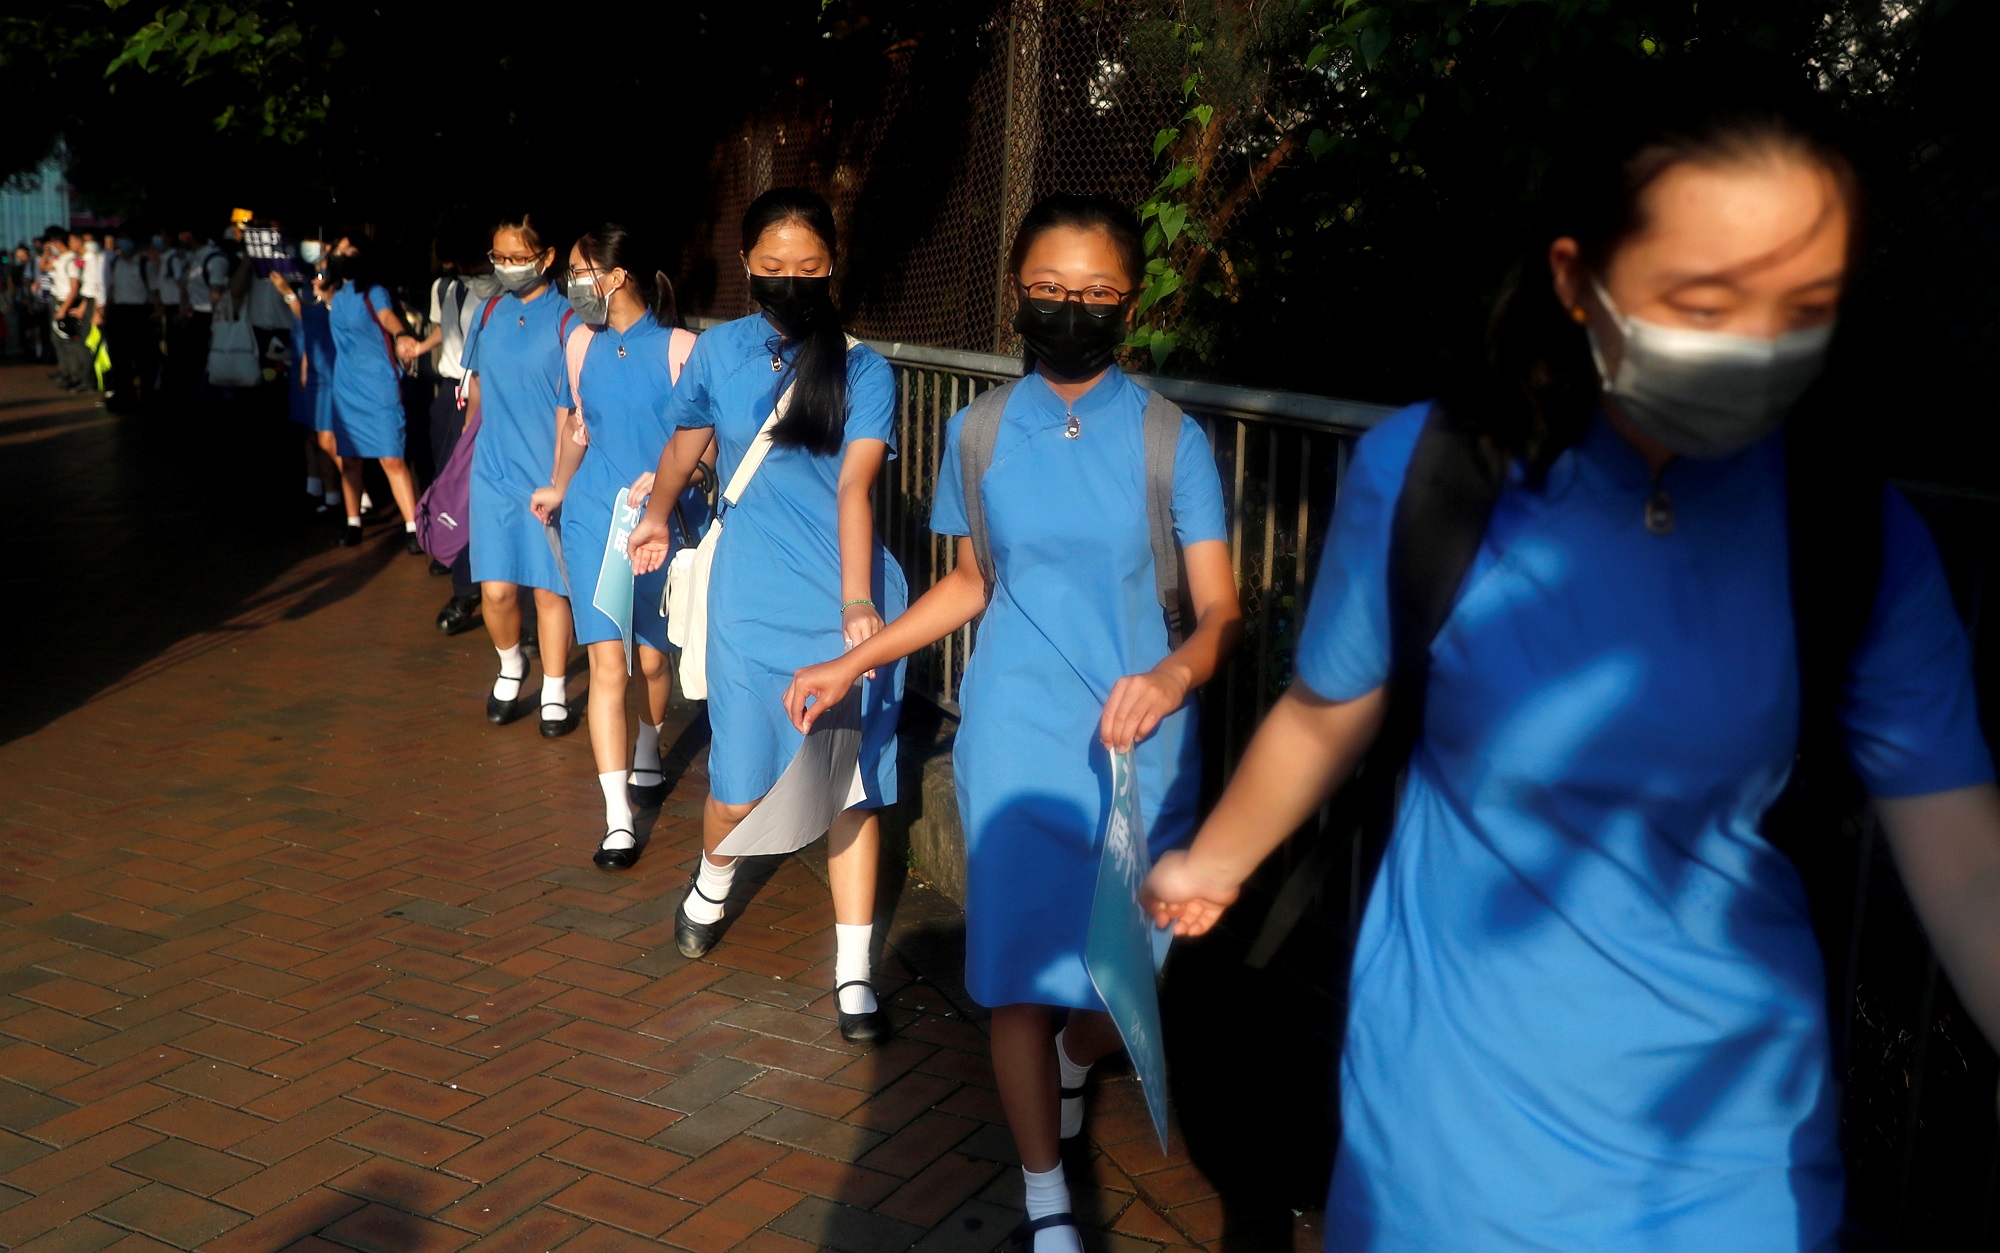 Secondary school students hold hands as they form a human chain as they demonstrate against what they say is police brutality against protesters, after clashes at Wan Chai district, in Hong Kong, China September 9, 2019. REUTERS/Amr Abdallah Dalsh